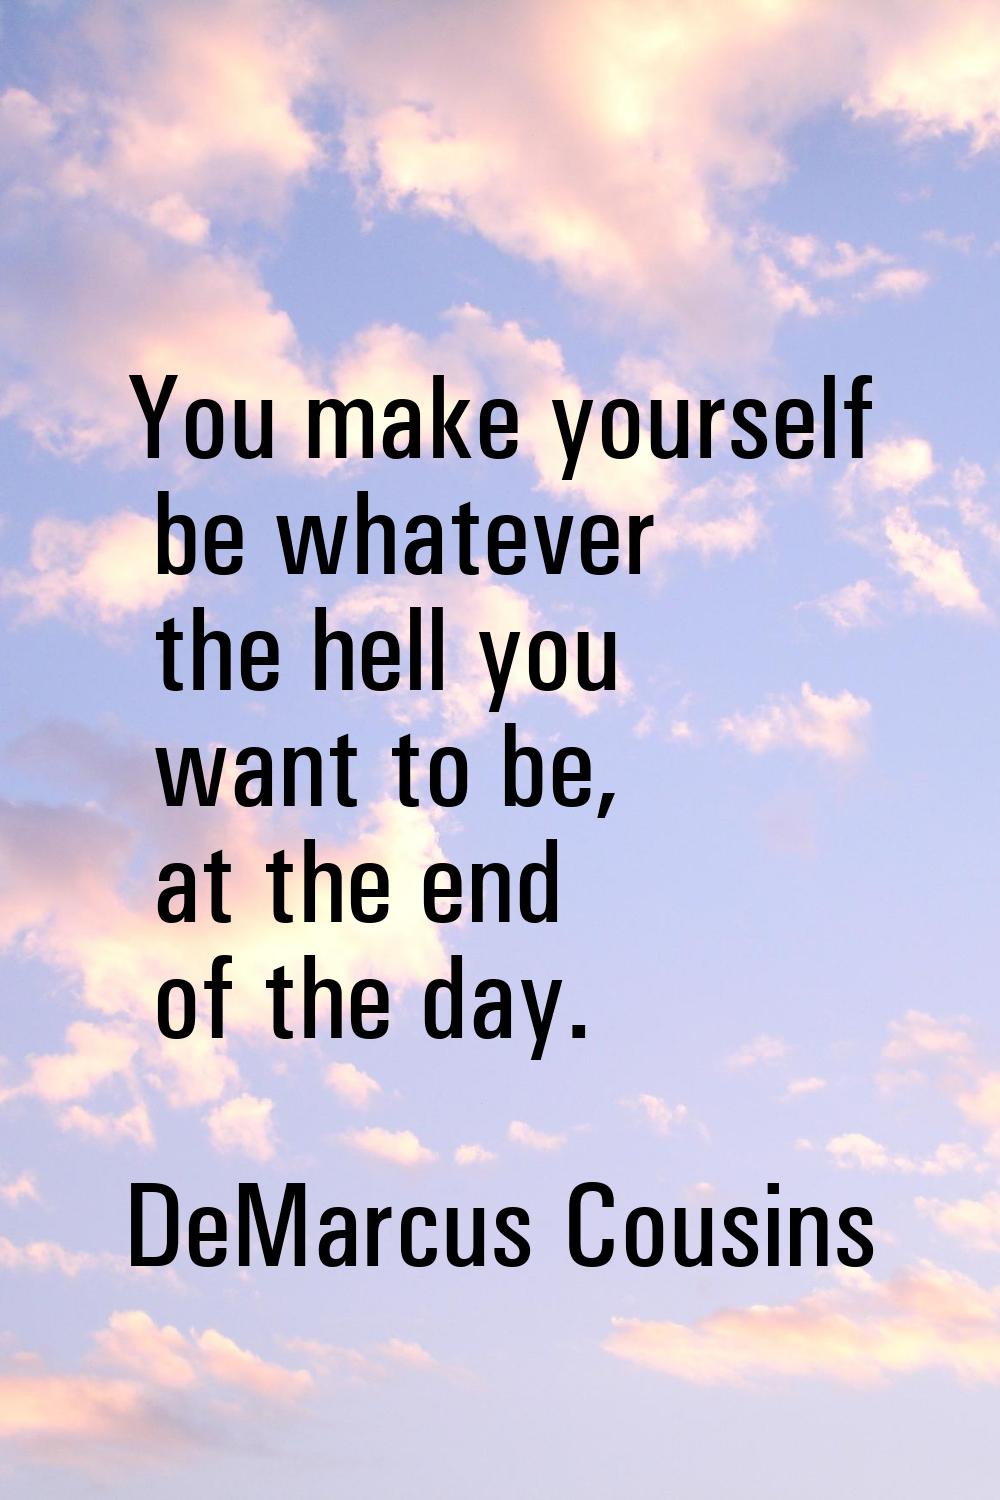 You make yourself be whatever the hell you want to be, at the end of the day.